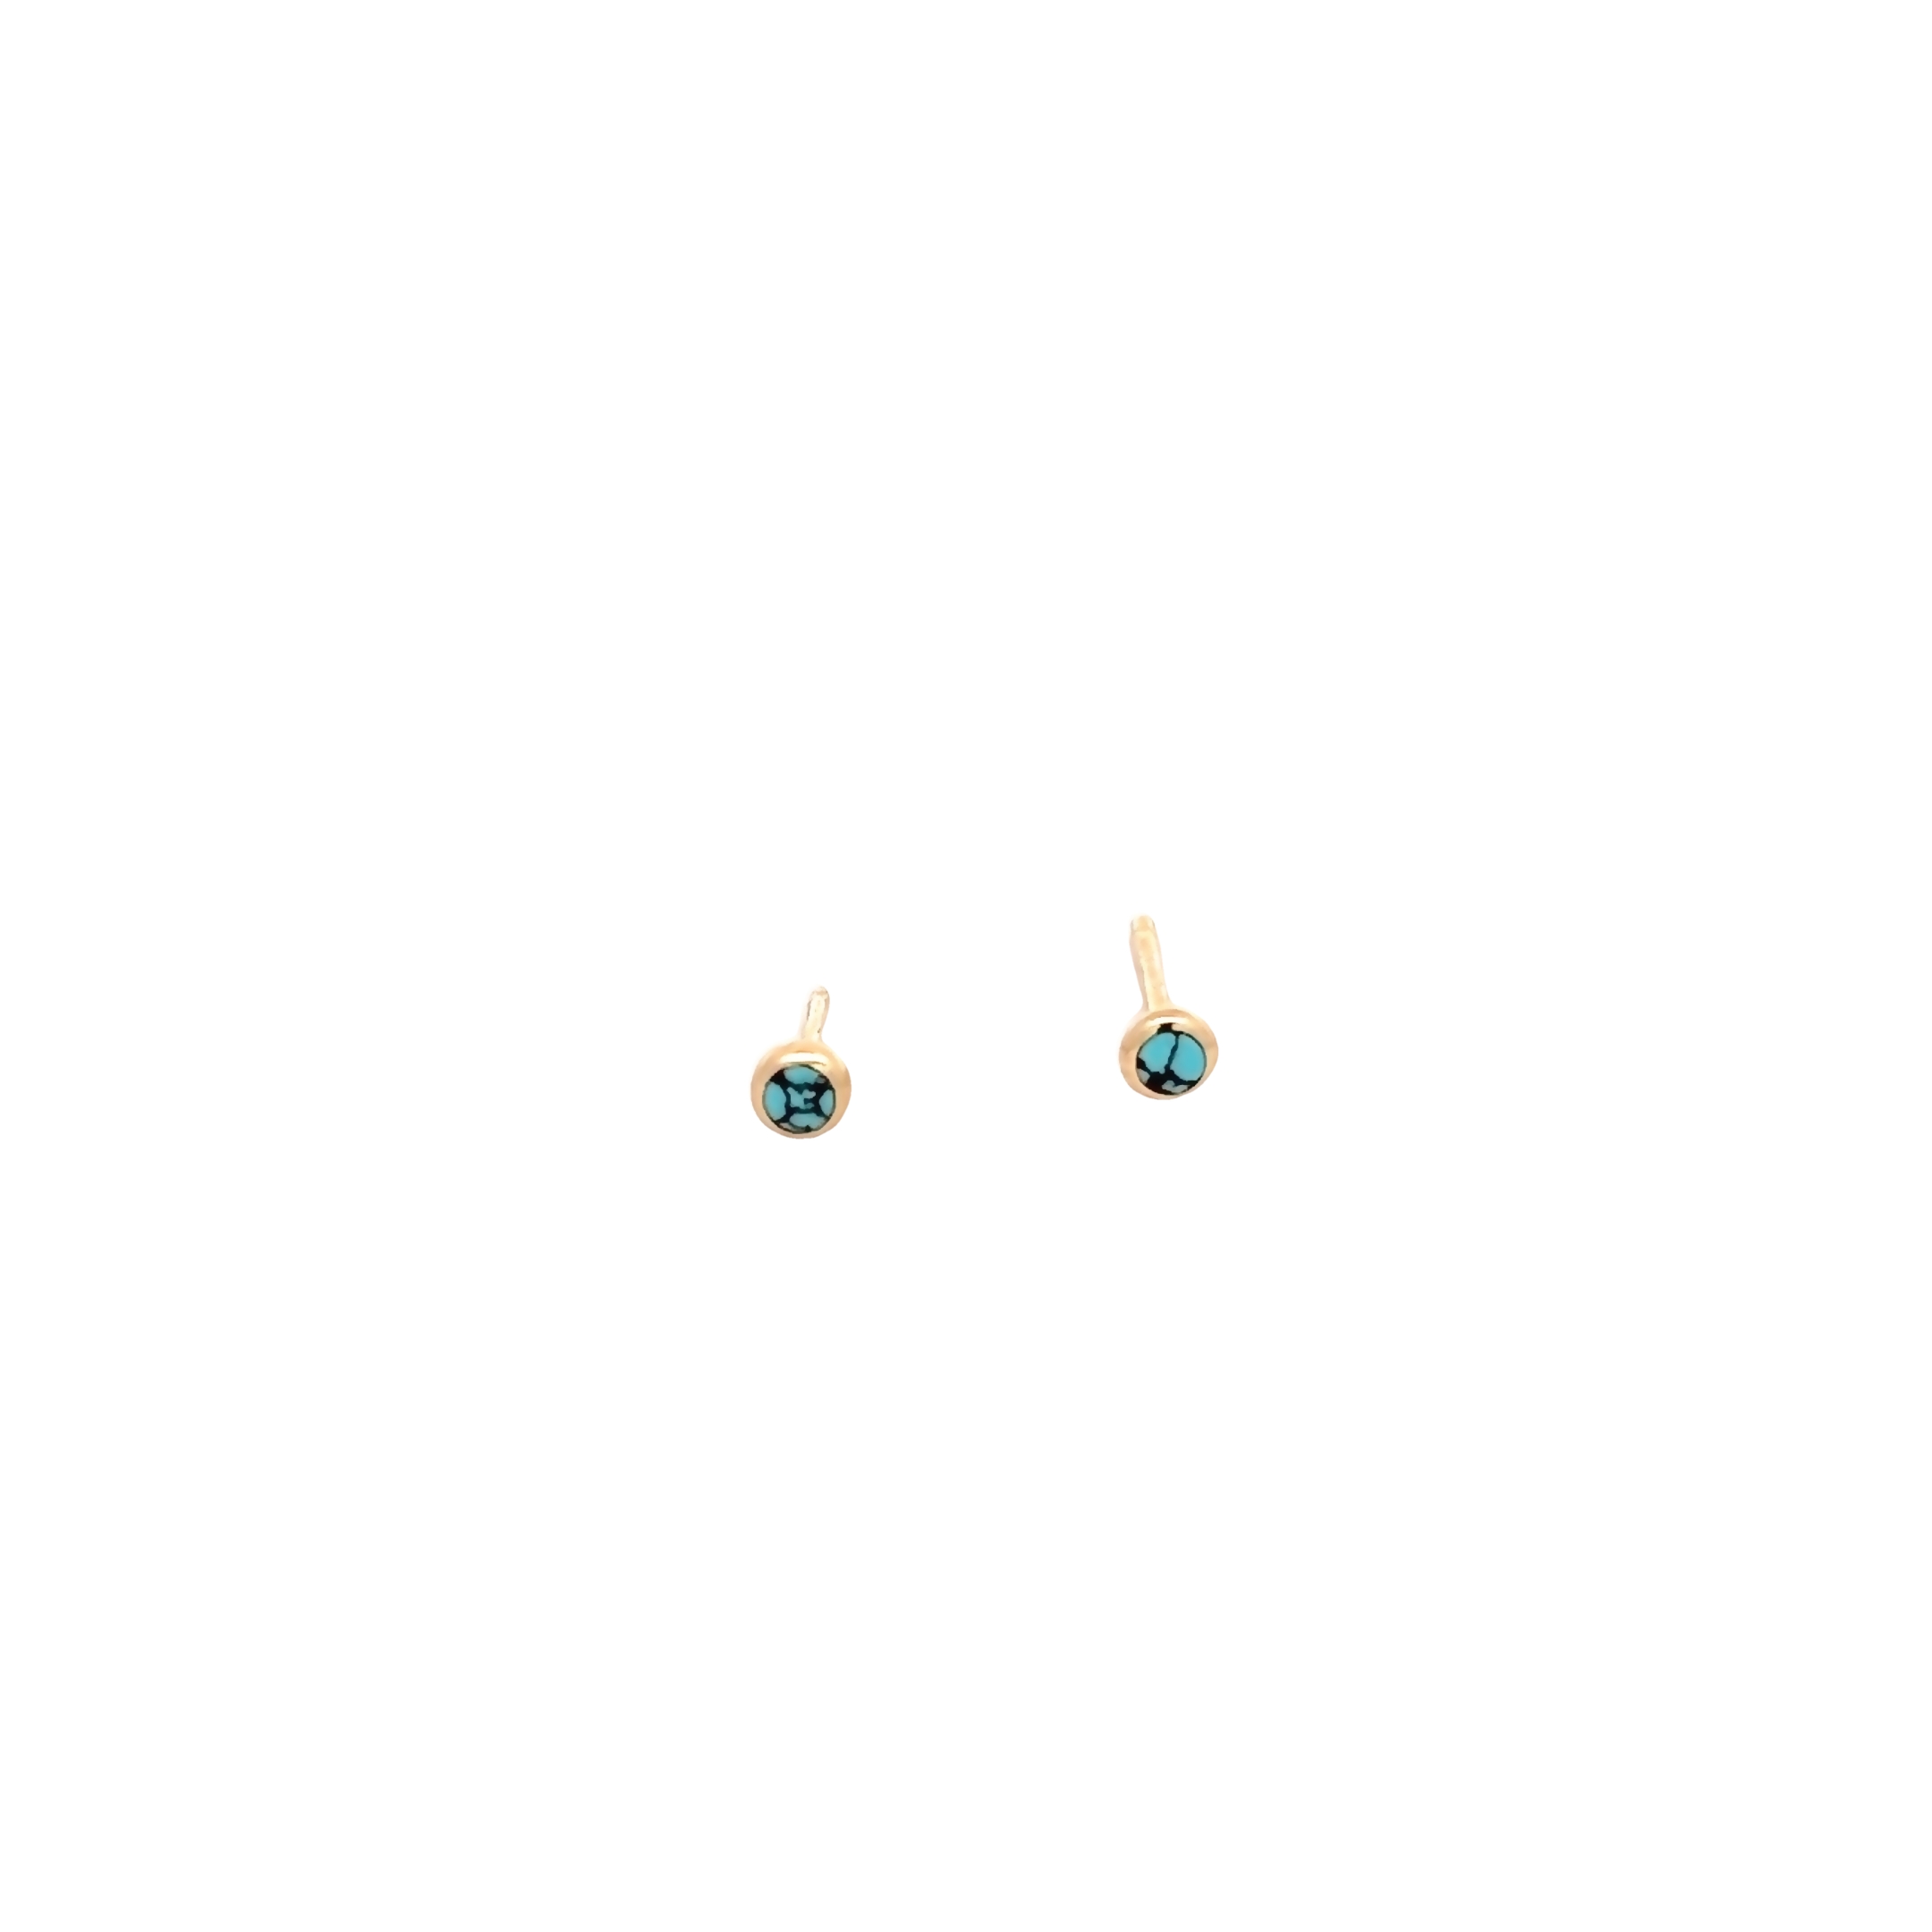 14 Karat yellow gold stud earrings with ChineseTurquoise inlay.